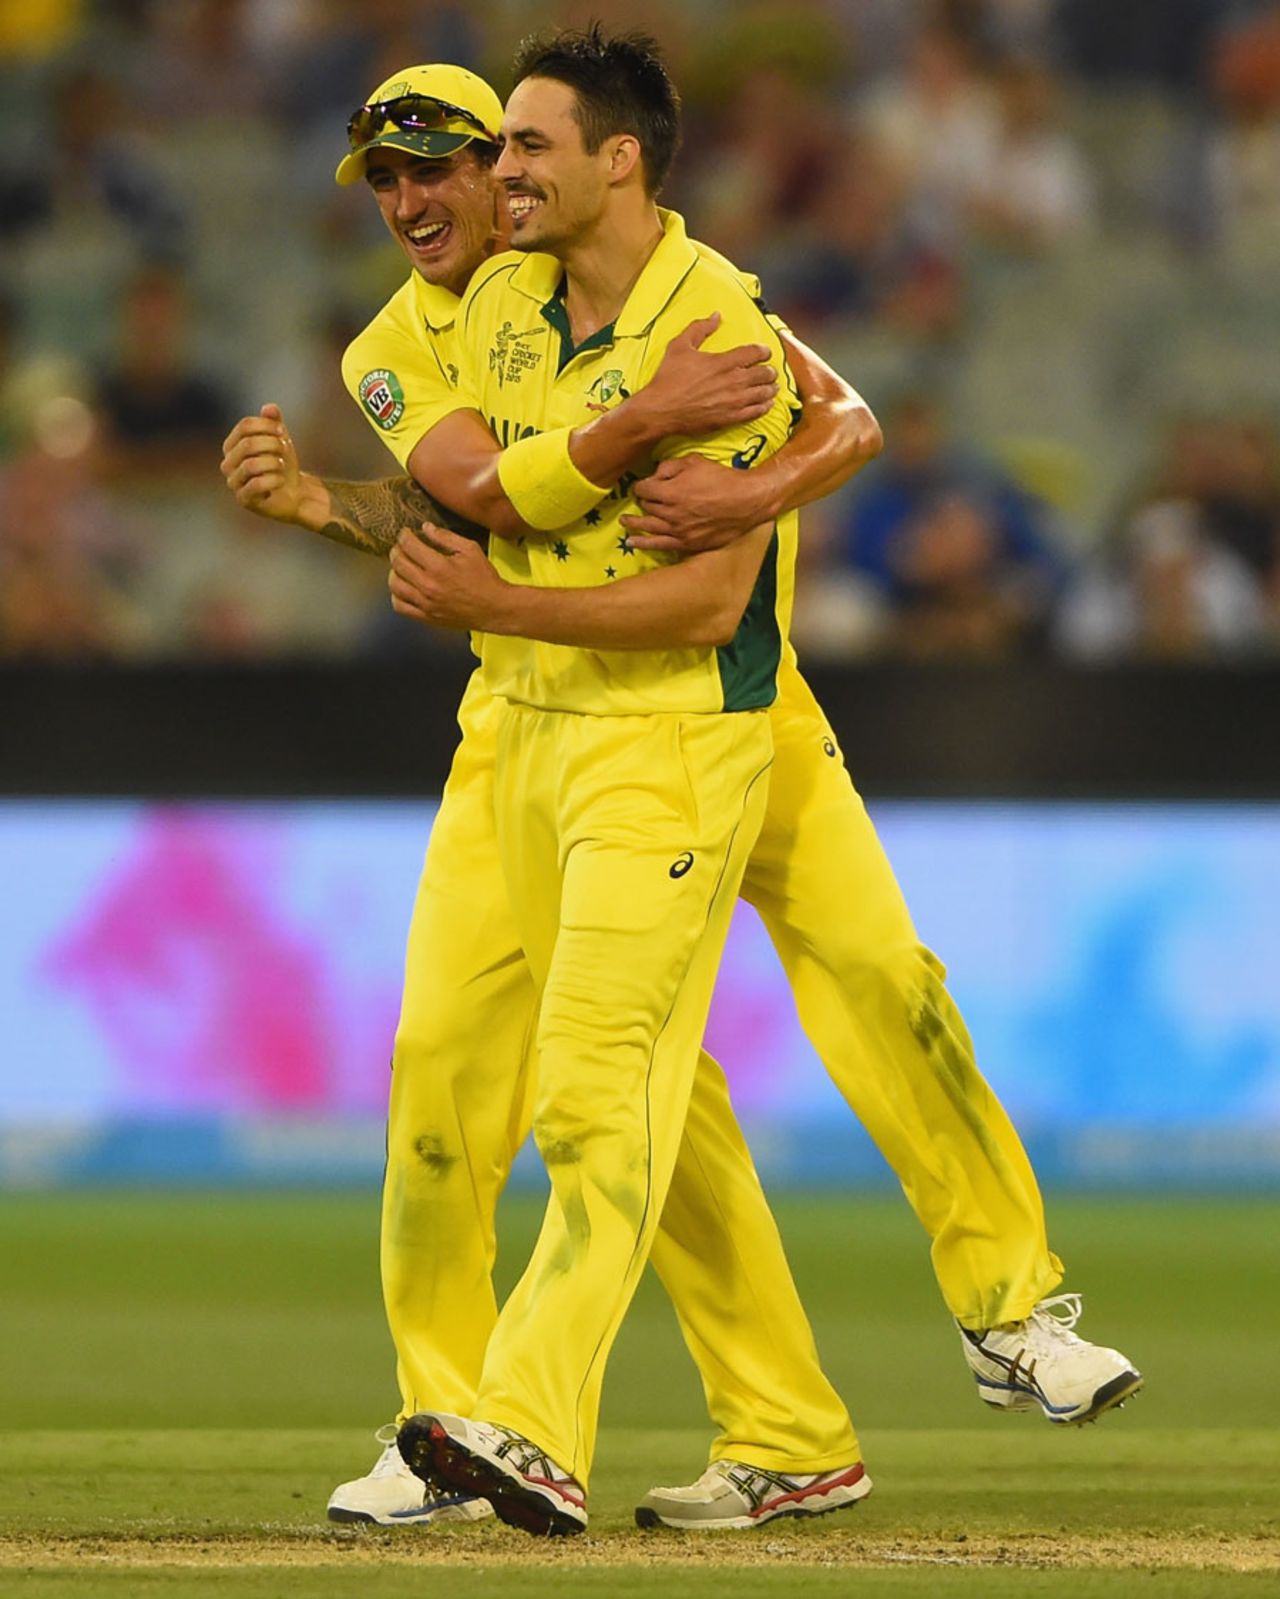 Mitchell Starc congratulates Mitchell Johnson after the latter took a wicket, Australia v England, Group A, World Cup 2015, Melbourne, February 14, 2015